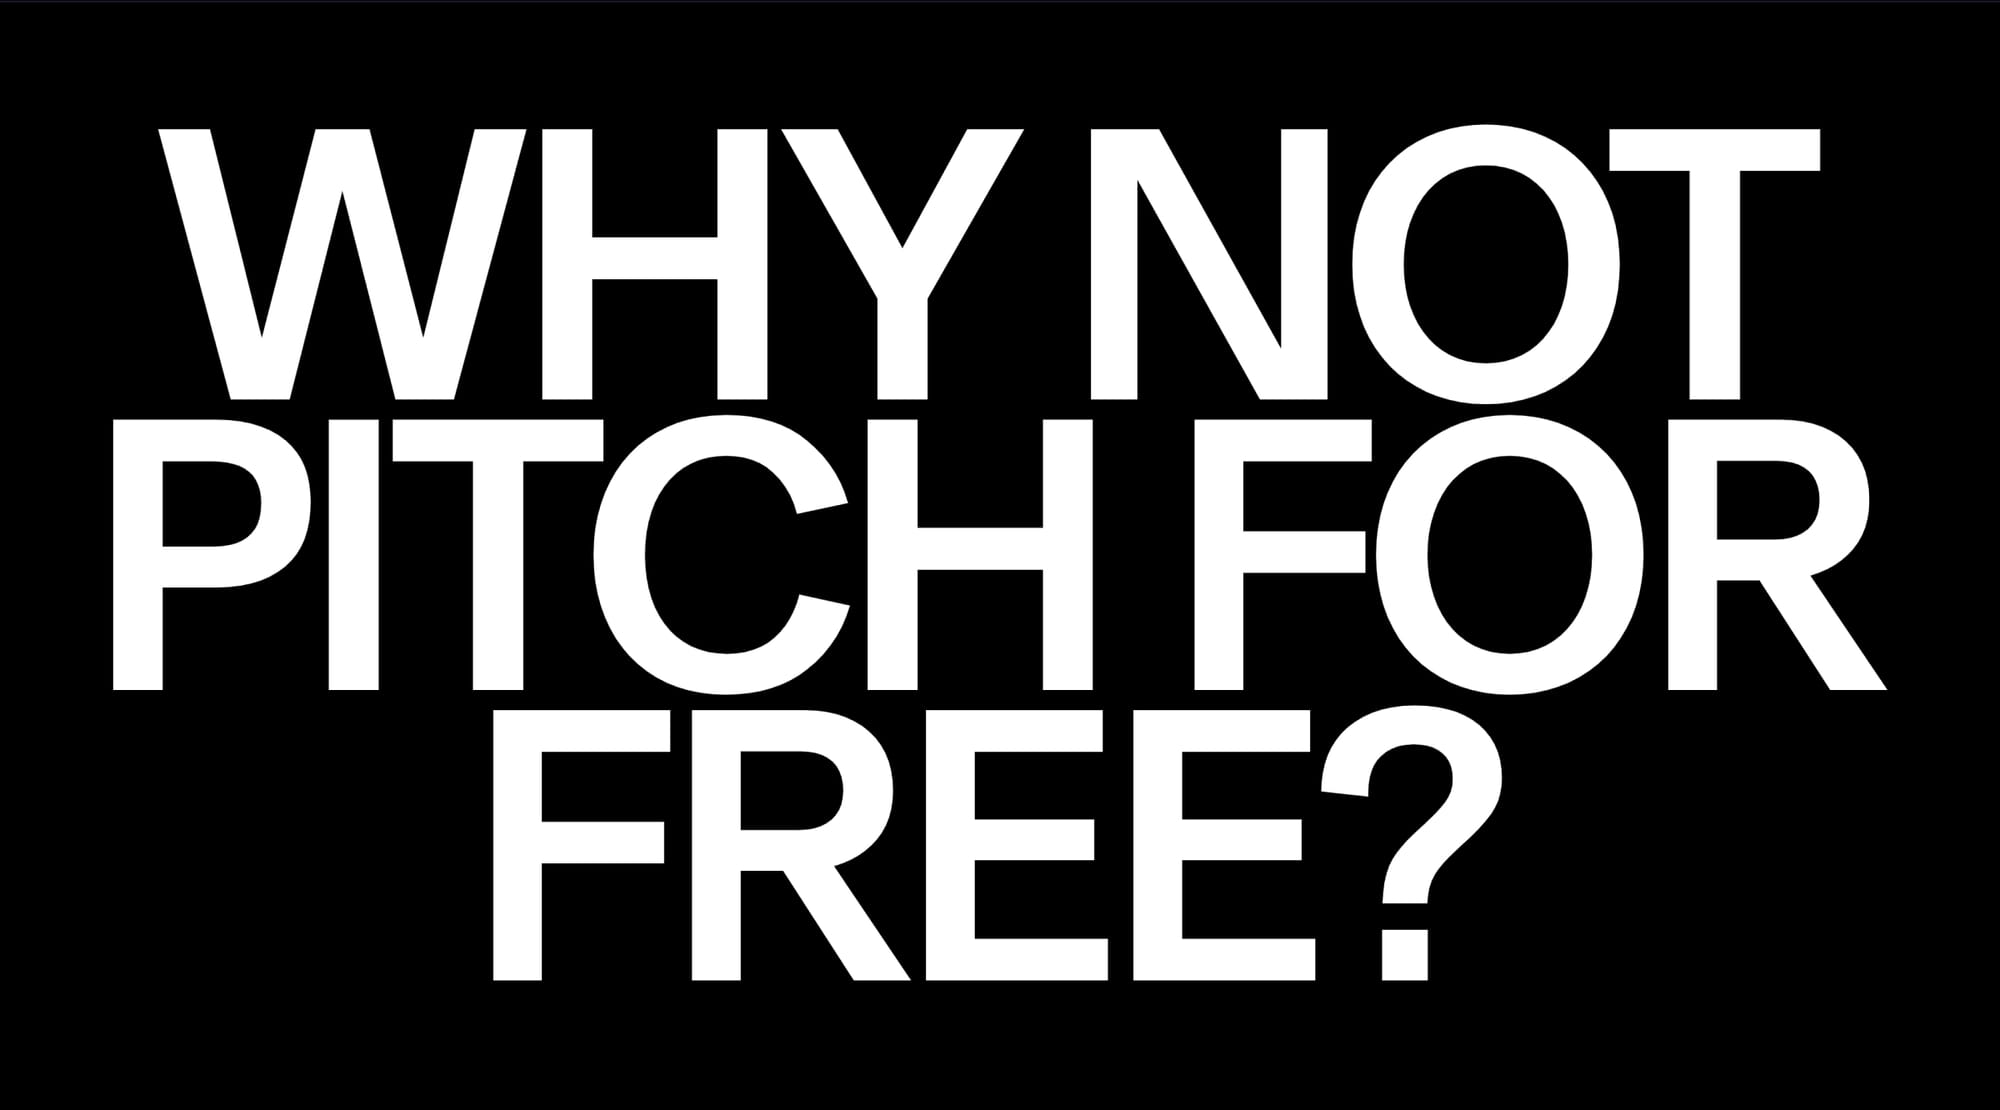 readymag blog: The fight to end free pitching in design